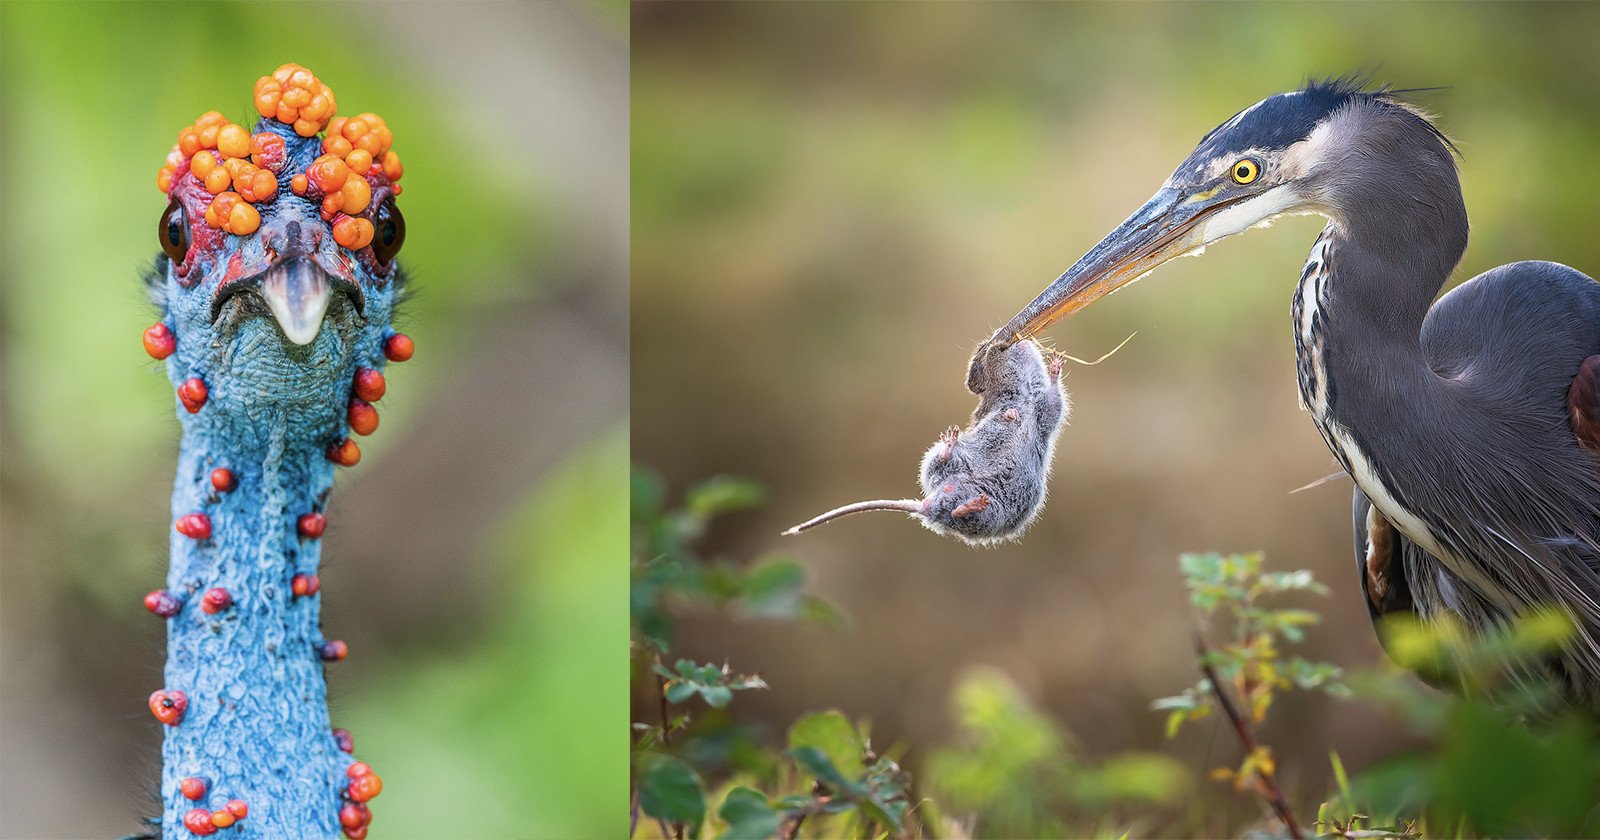 The Current Frontrunners for Bird Photographer of the Year 2022